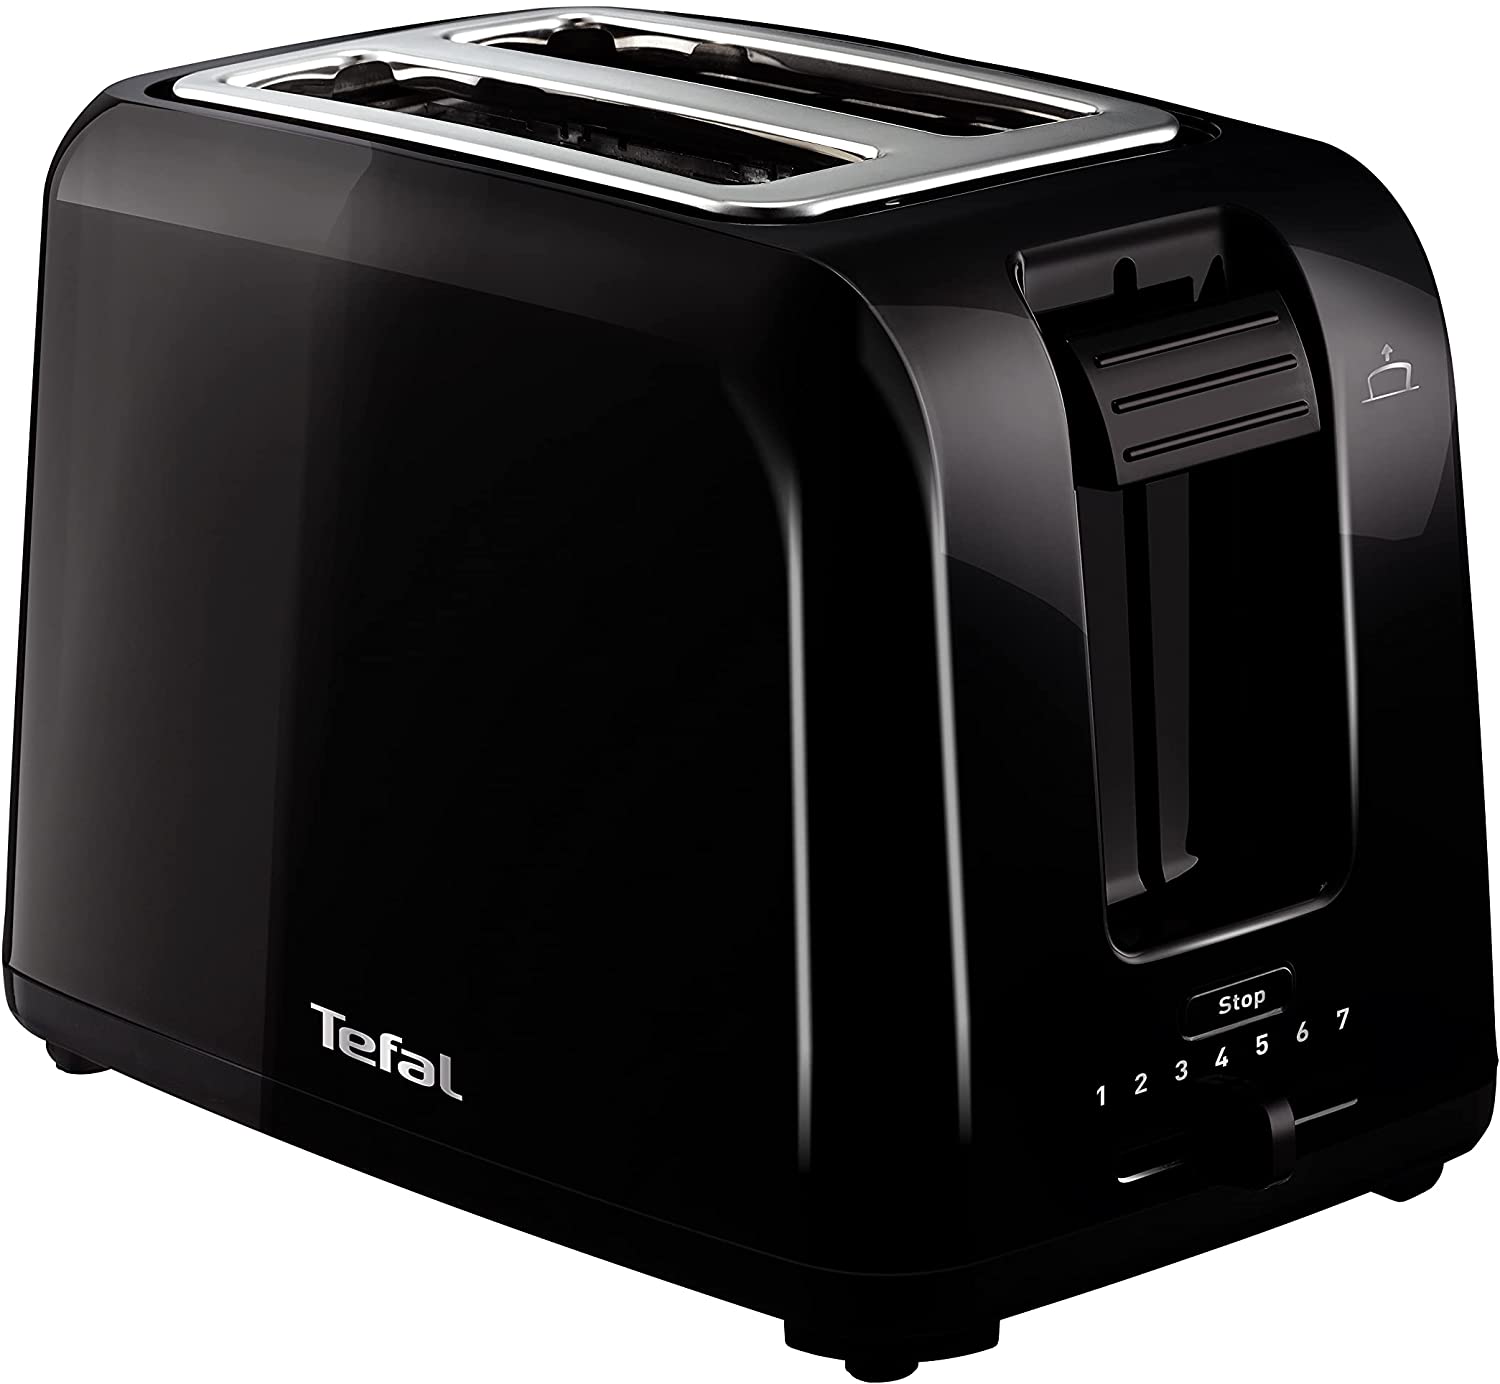 Tefal TT1A28 Vita Toaster, 7 Browning Levels, 2 Toast Slots, Centres Bread Slices, Lifting Function, Function Buttons, Crumb Drawer, Black